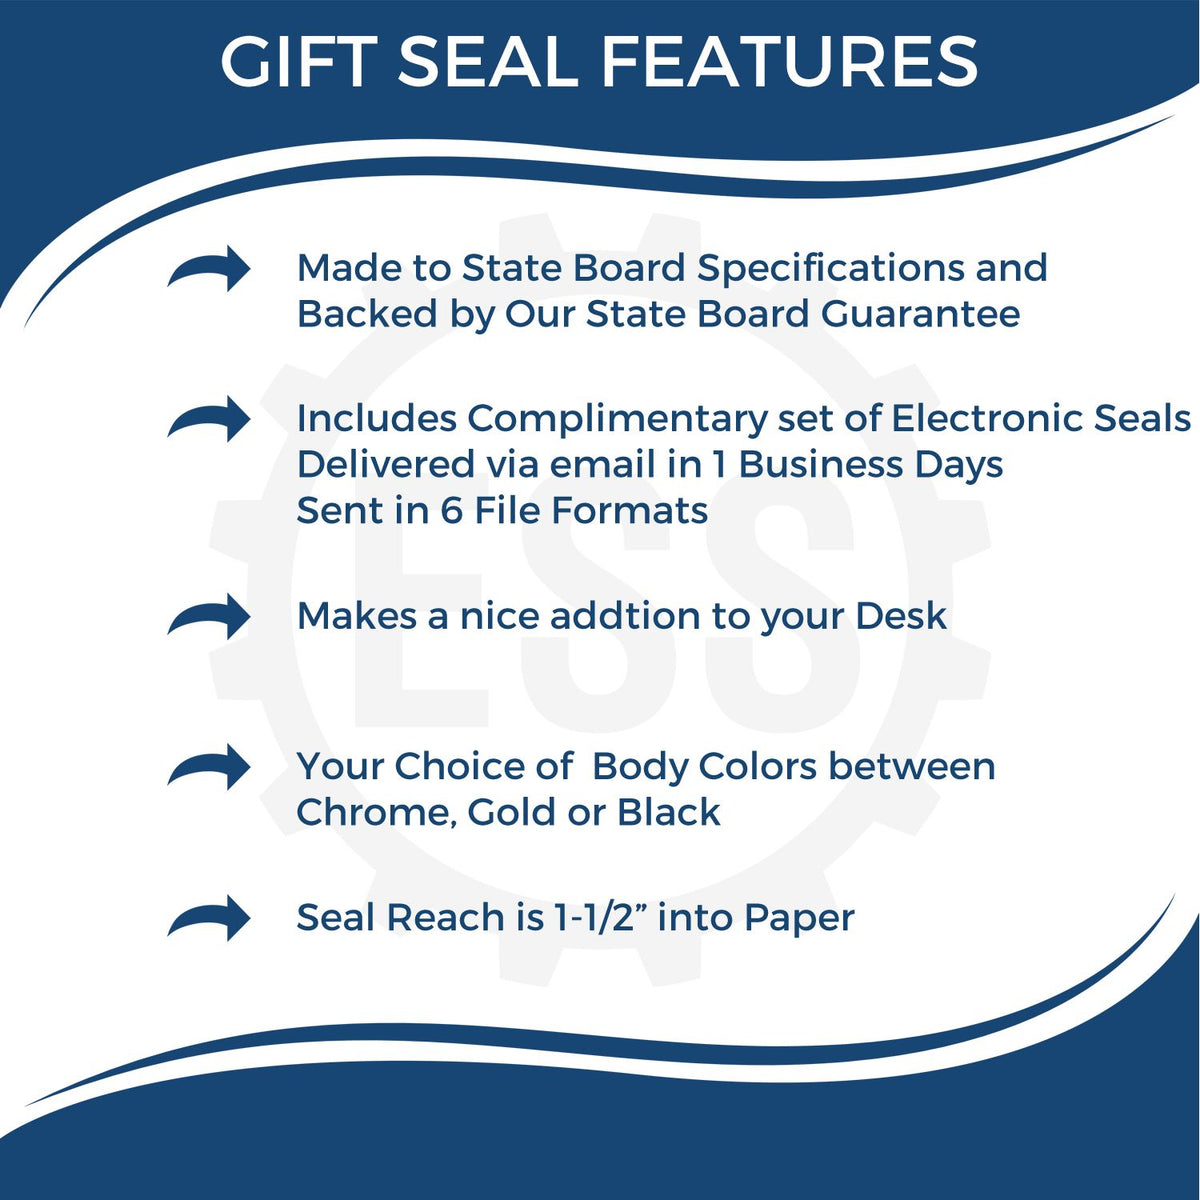 A picture of an infographic highlighting the selling points for the Gift Connecticut Land Surveyor Seal